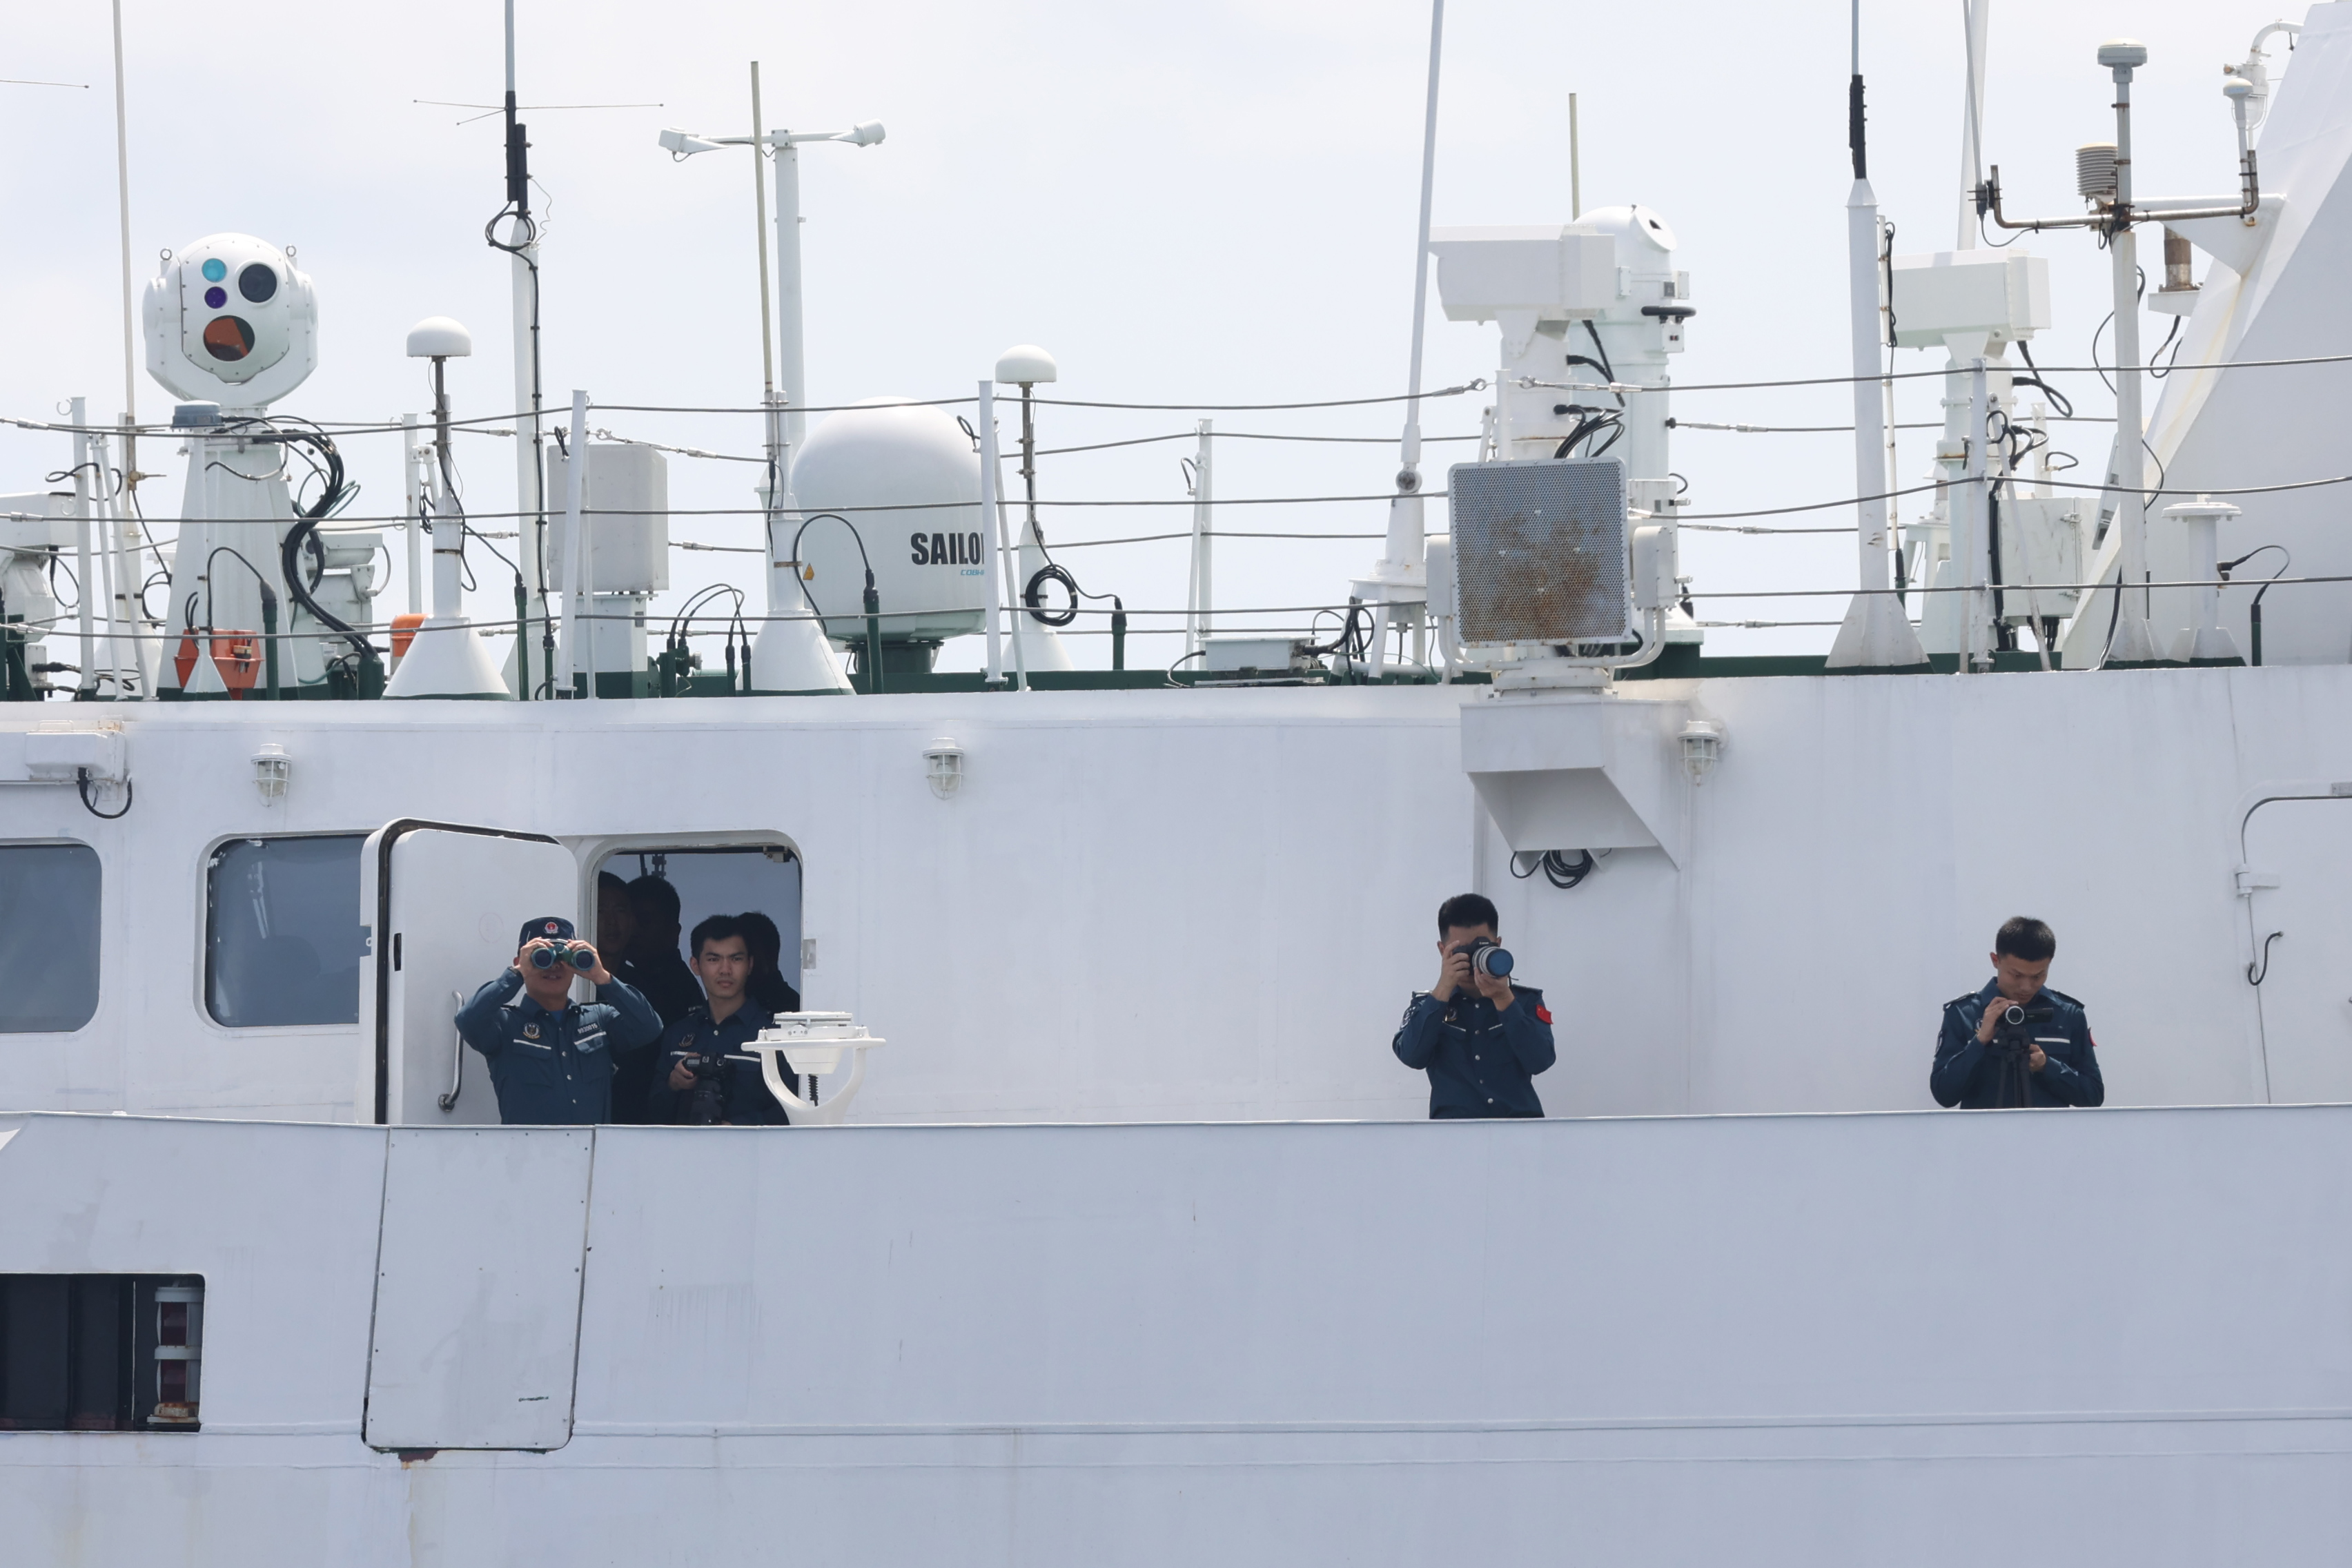 Members of the Chinese Coast Guard photograph Filipino fishermen and media observers on the side of their ship